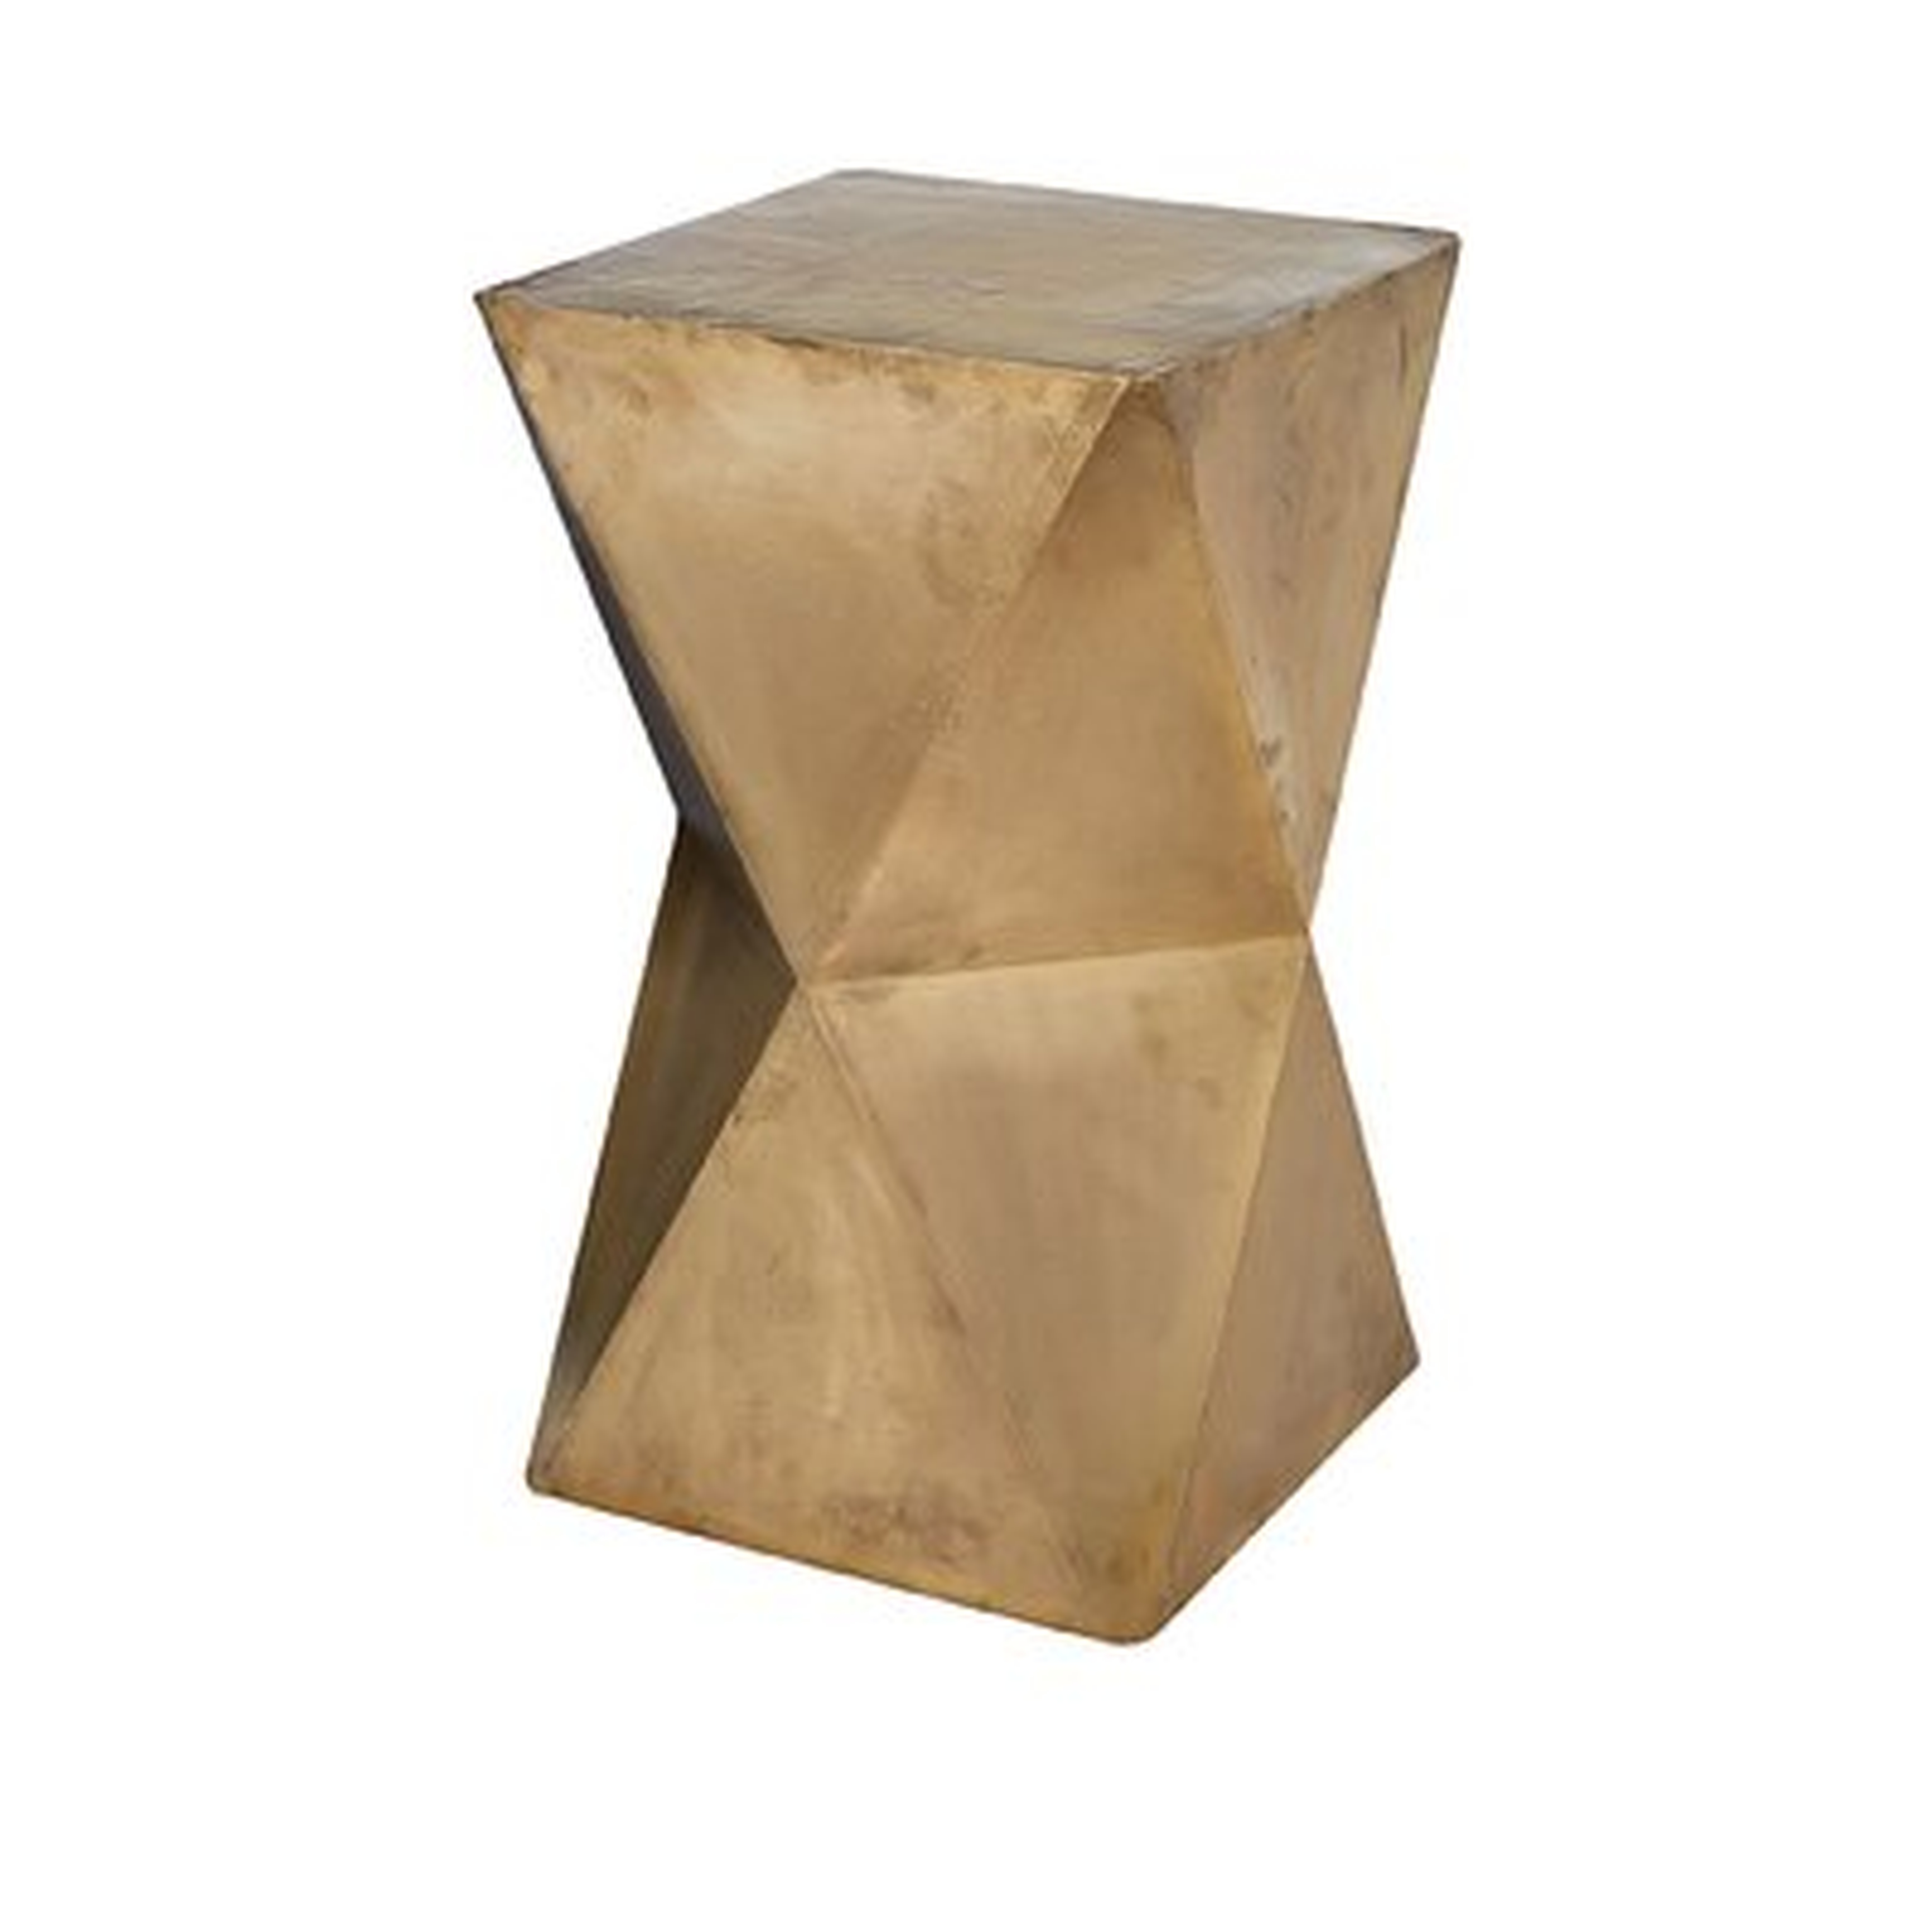 Sheraton Faceted Stool with Brass Cladding - Wayfair